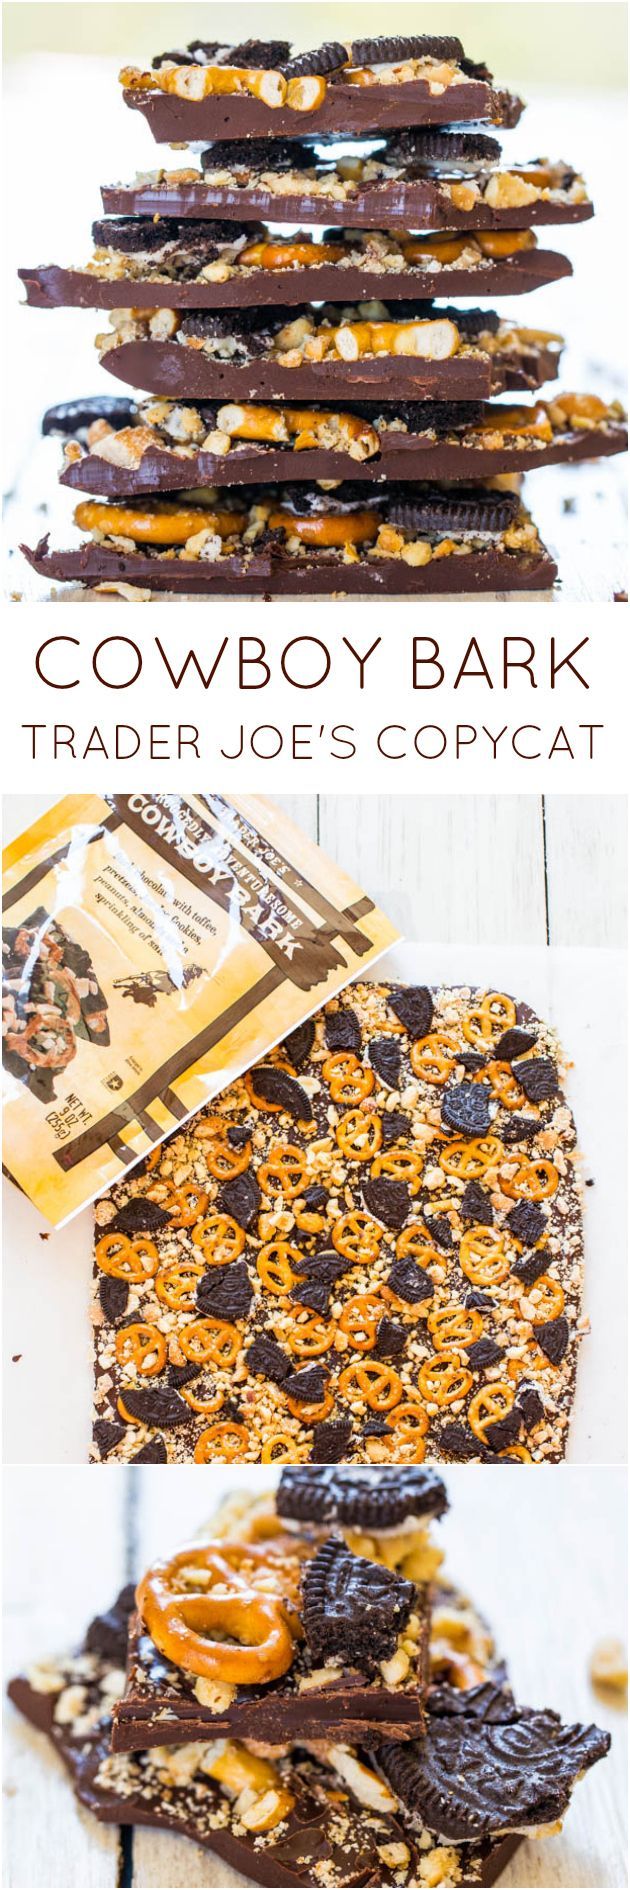 Cowboy Bark: Trader Joes Copycat Recipe – Just like the real thing & ready in 5 minutes. Salty, sweet & supremely good!